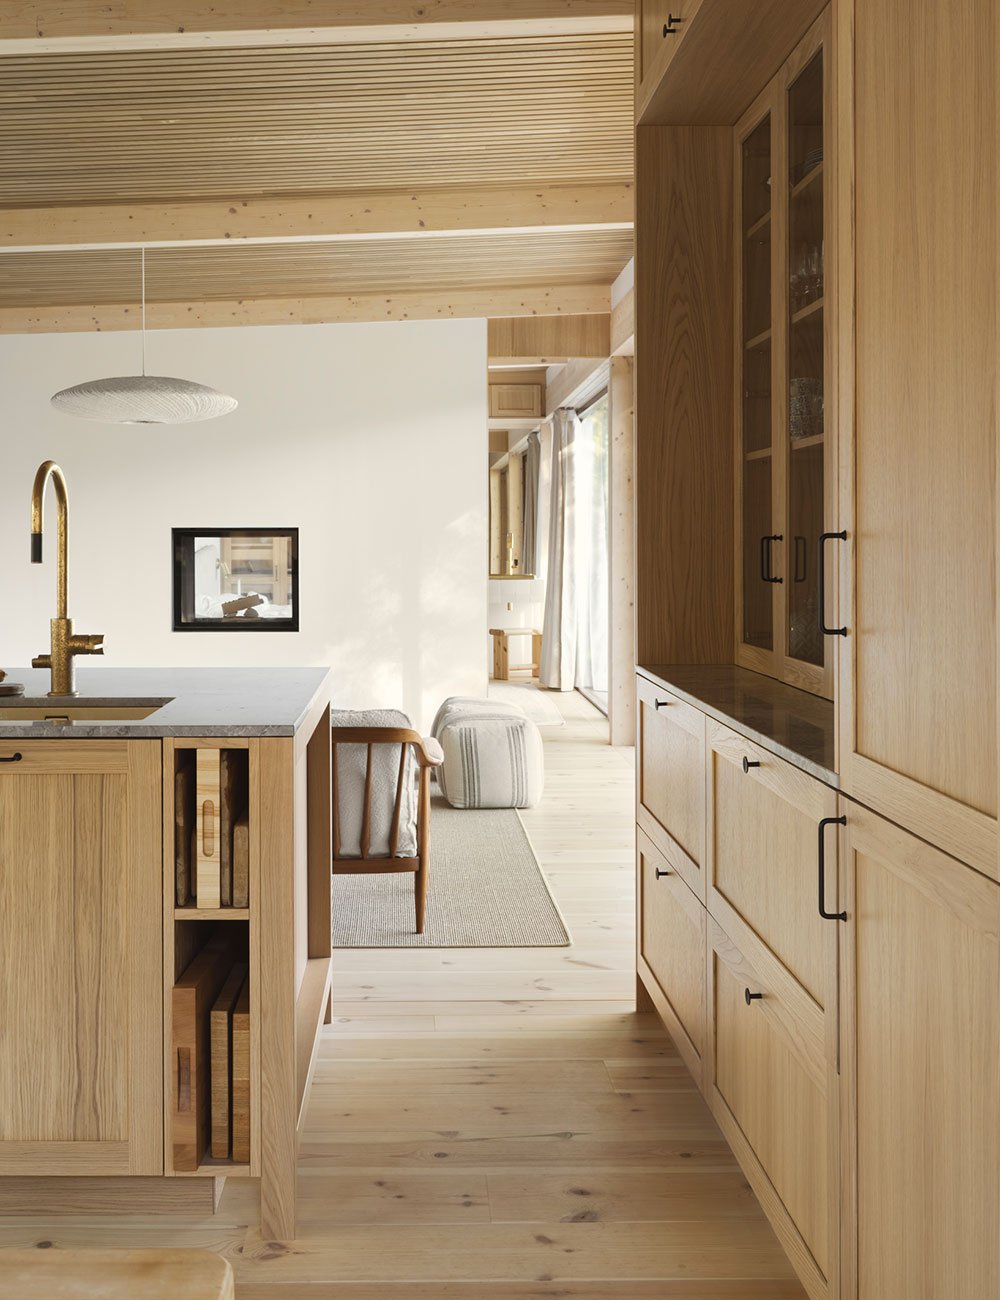 The Wooden Kitchen From Grand Designs